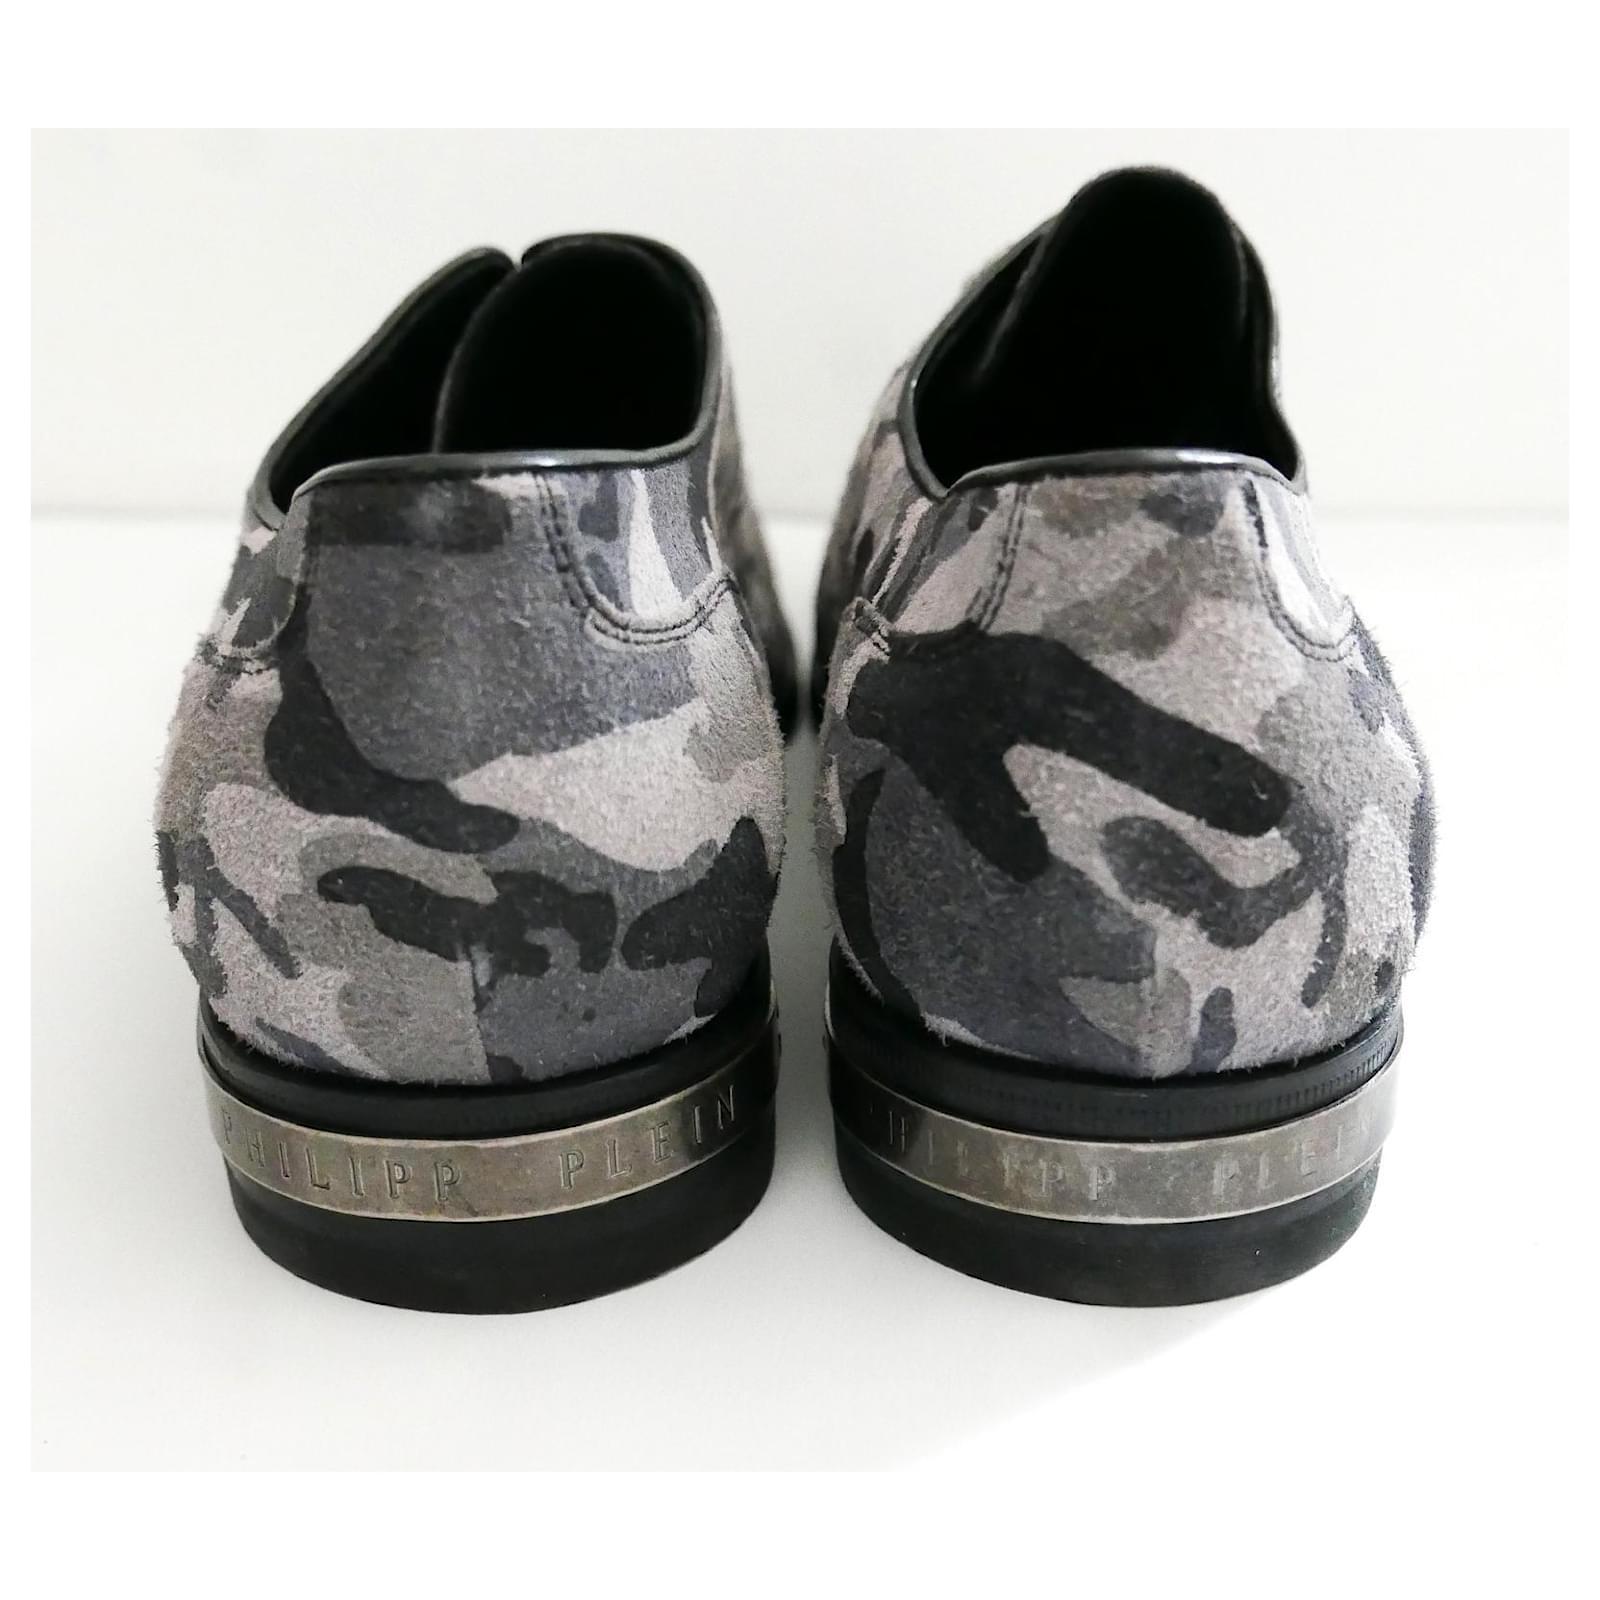 Men's Philipp Plein SS14 Camouflage Skull Class Shoes For Sale